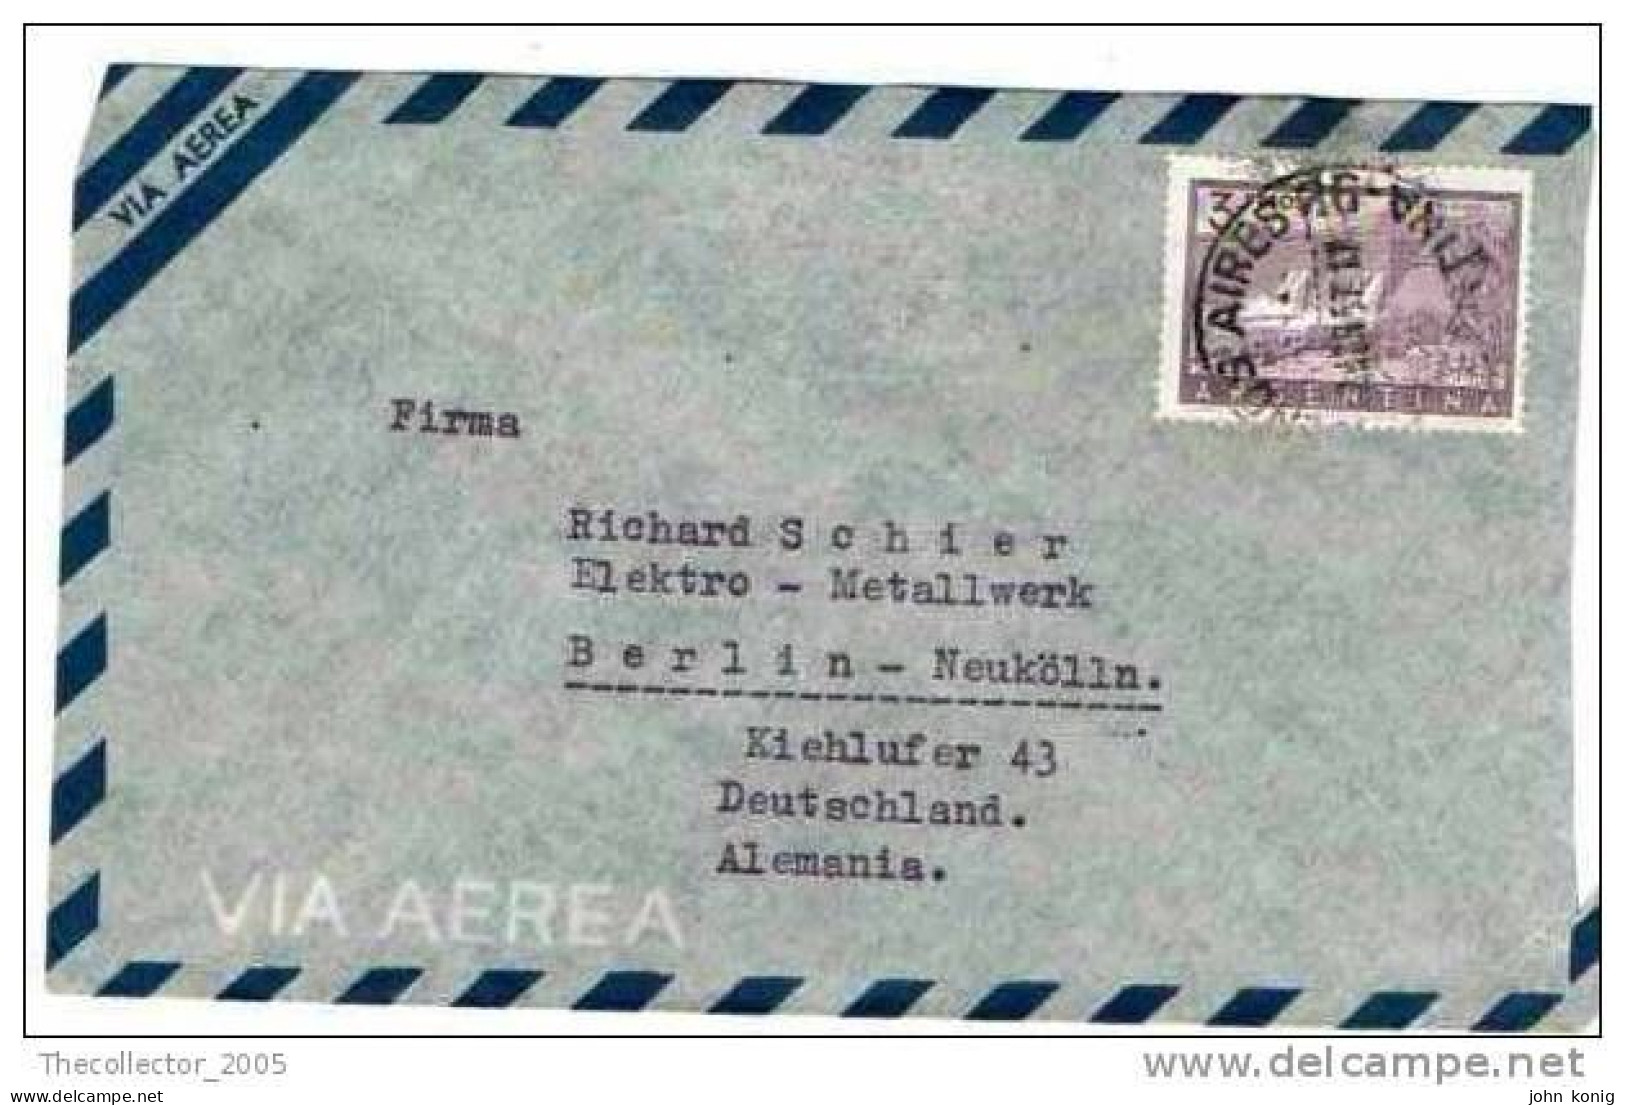 Lettera Busta Argentina-Argentinien Letter- Cover - Briefe- Posta Aerea Anni '50 (of '50s)-Air Mail-to Germany-Berlin - Posta Aerea